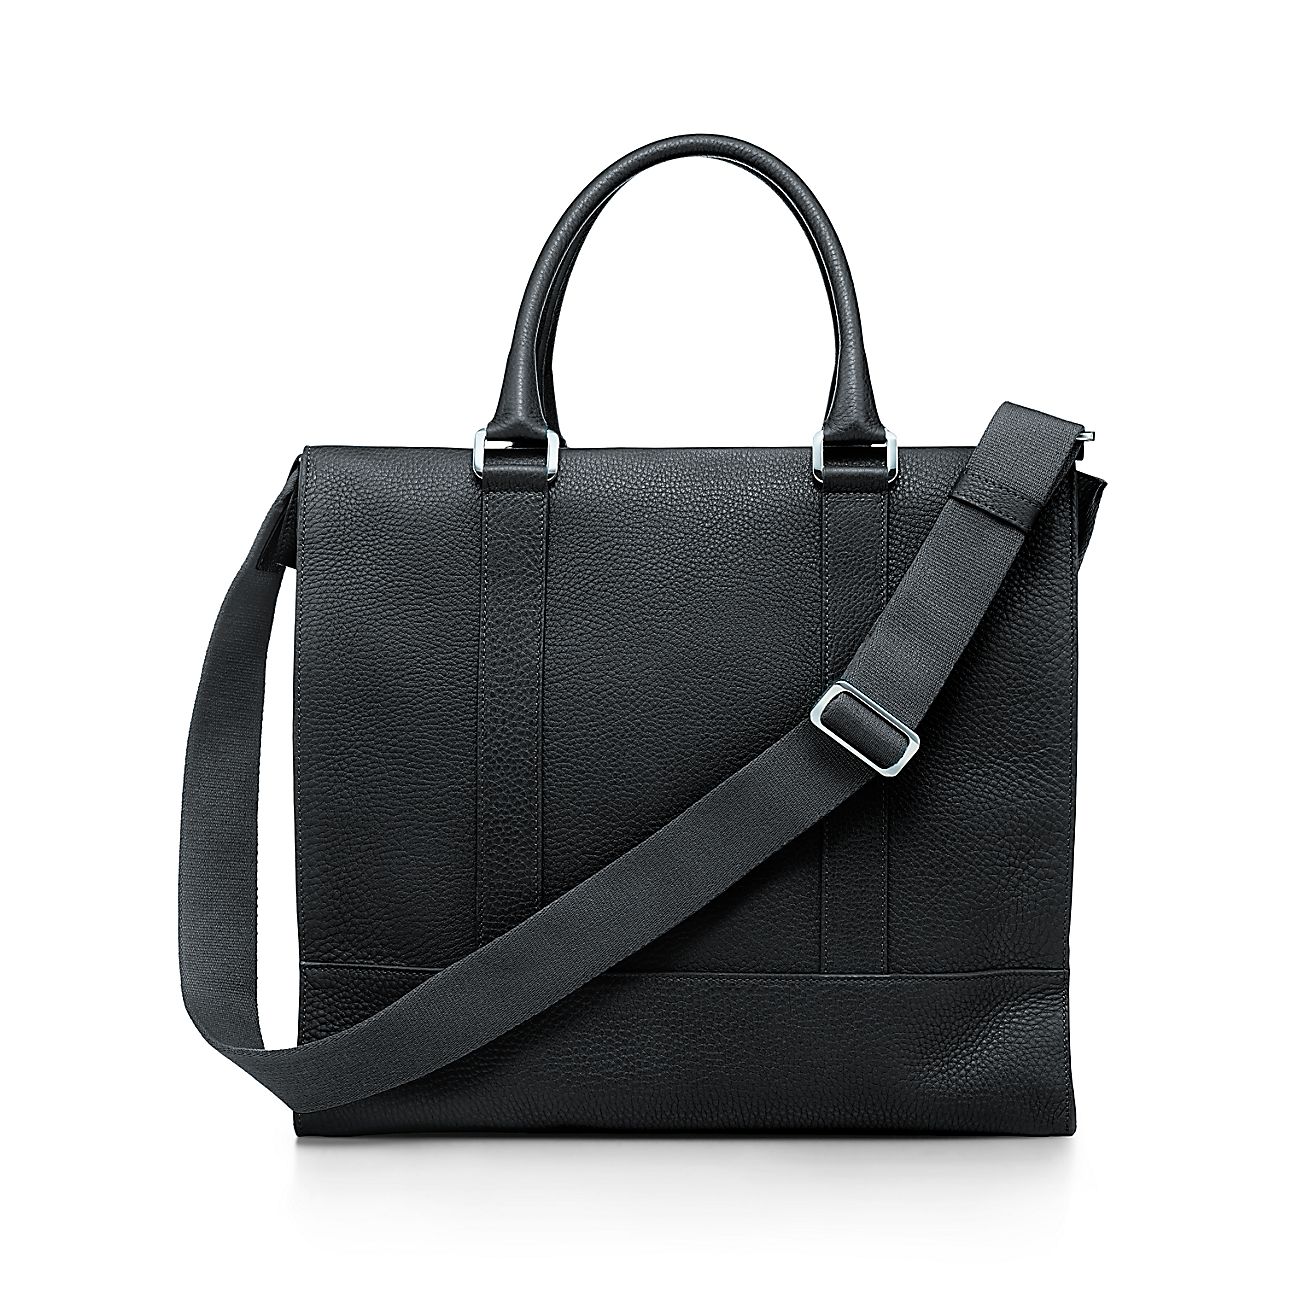 Wyatt tote in onyx grain leather. More colors available. | Tiffany & Co.